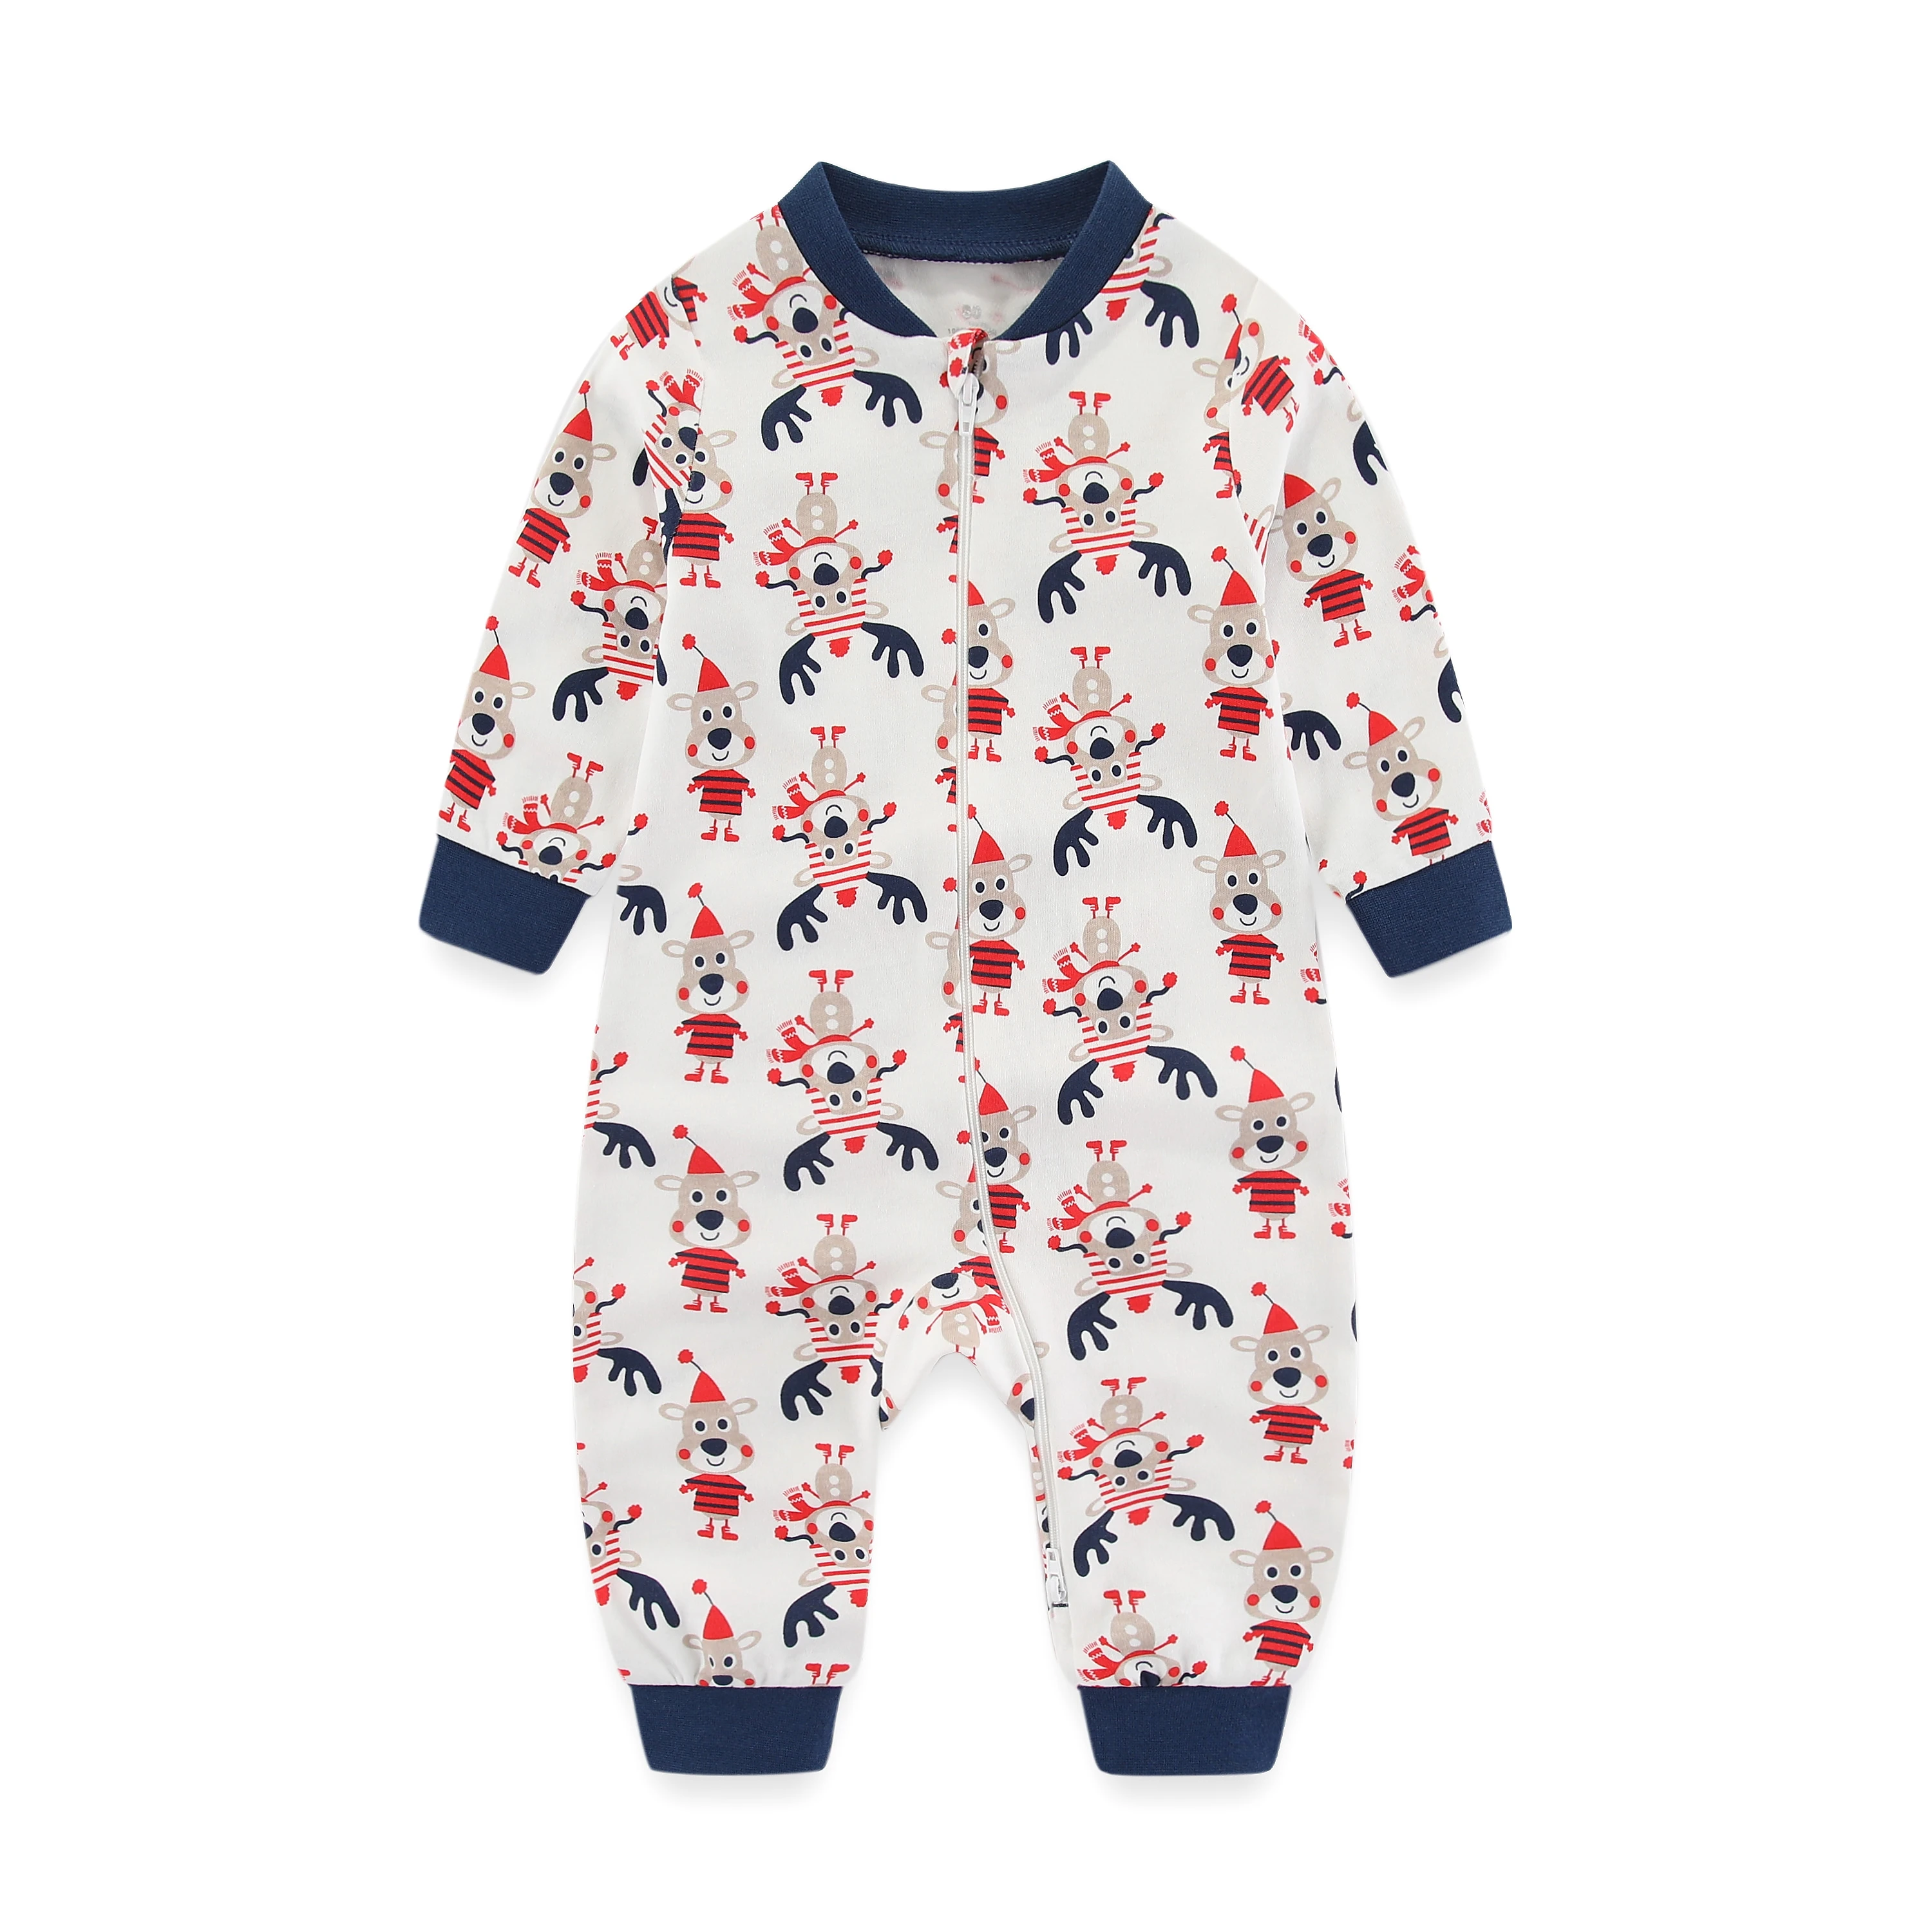 

Four Seasons Newborn Cute Cartoon Clothes baby girl clothes Infant rompers Long Sleeve Boy Girl bodysuits 0-24 Months baby